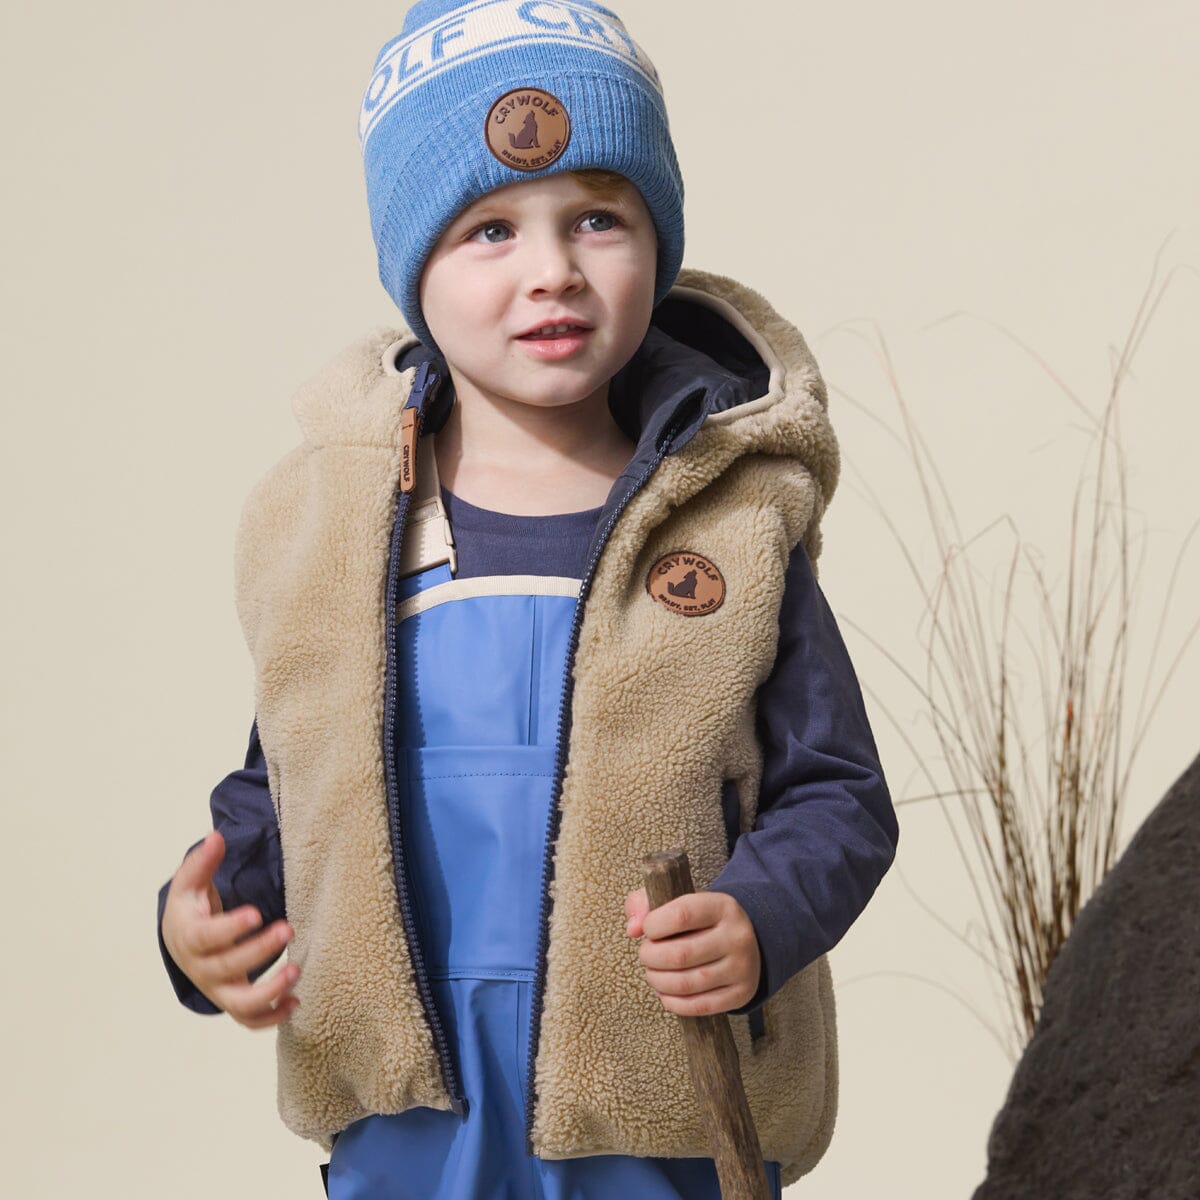 Crywolf | REVERSIBLE YETI VEST - Black/Camel *** PRE ORDER / DUE EARLY-MID APRIL *** Boys Crywolf